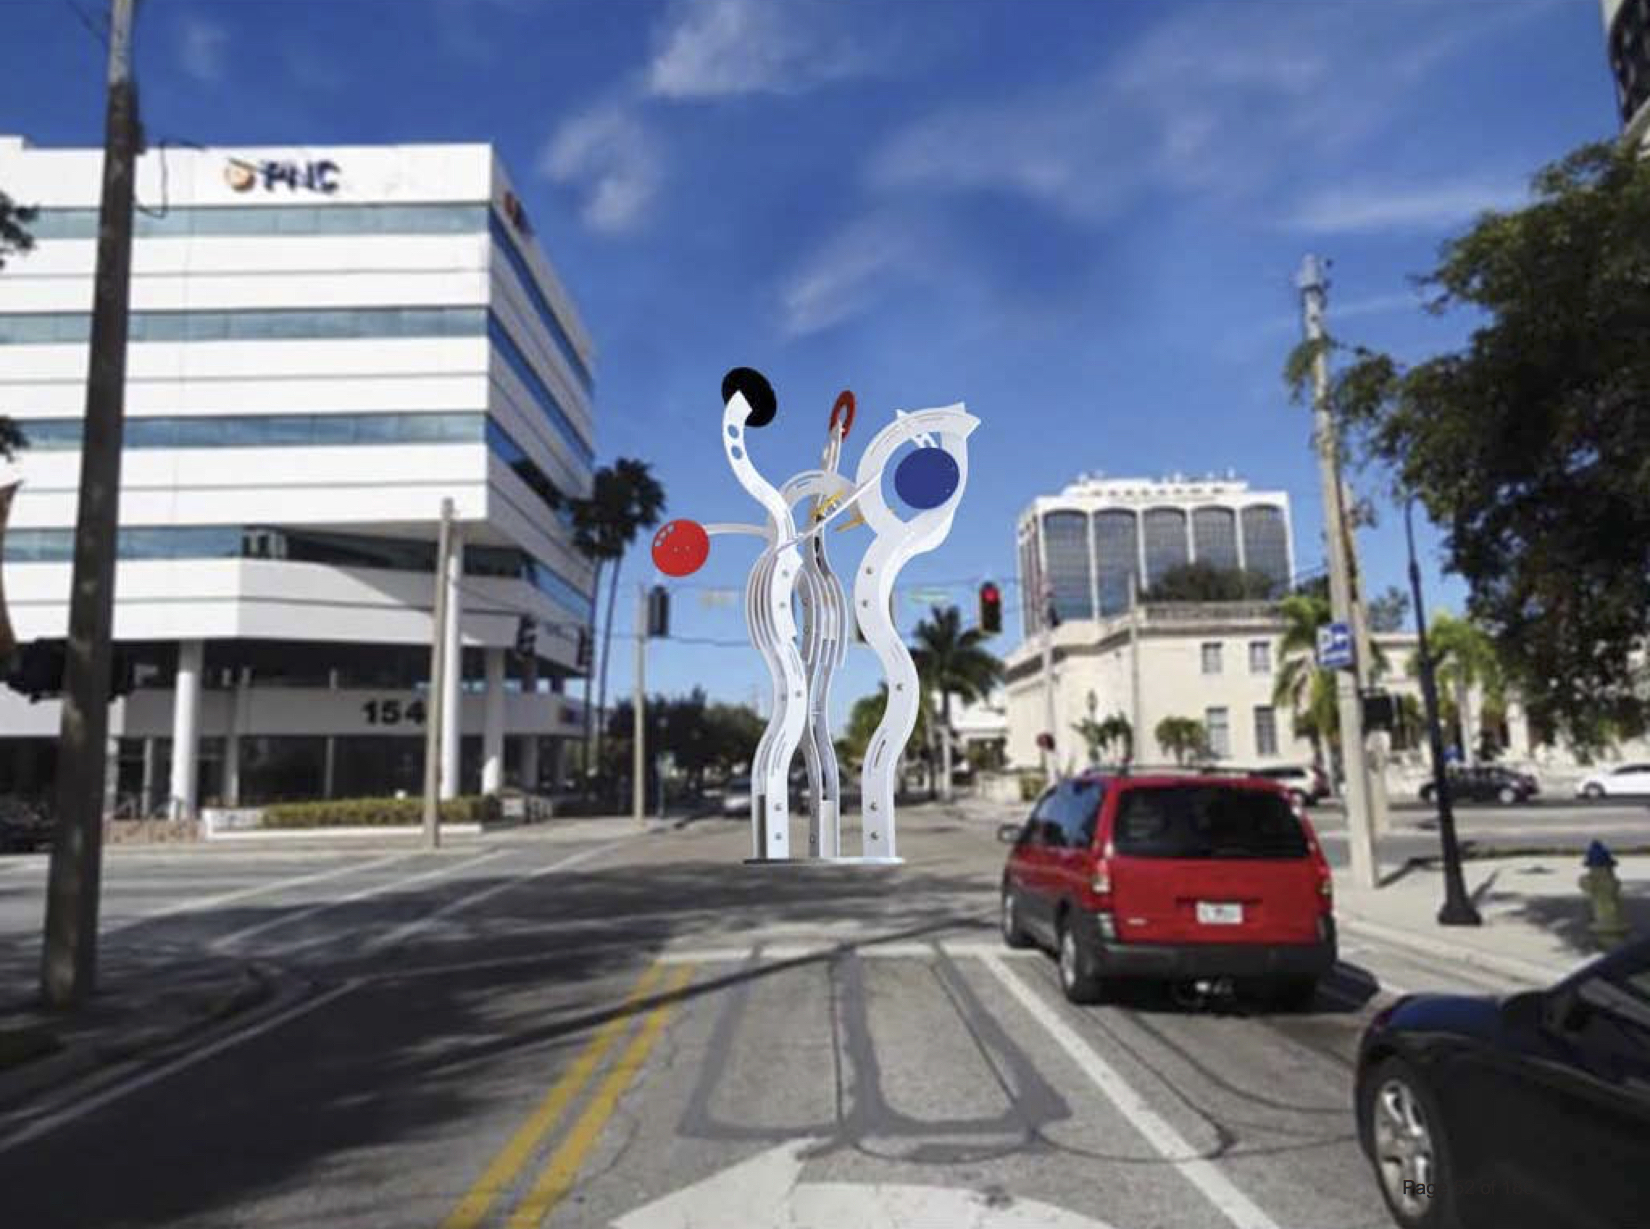 This rendering depicts Jorge Blanco's sculpture at the center of the Orange Avenue-Ringling Boulevard intersection.